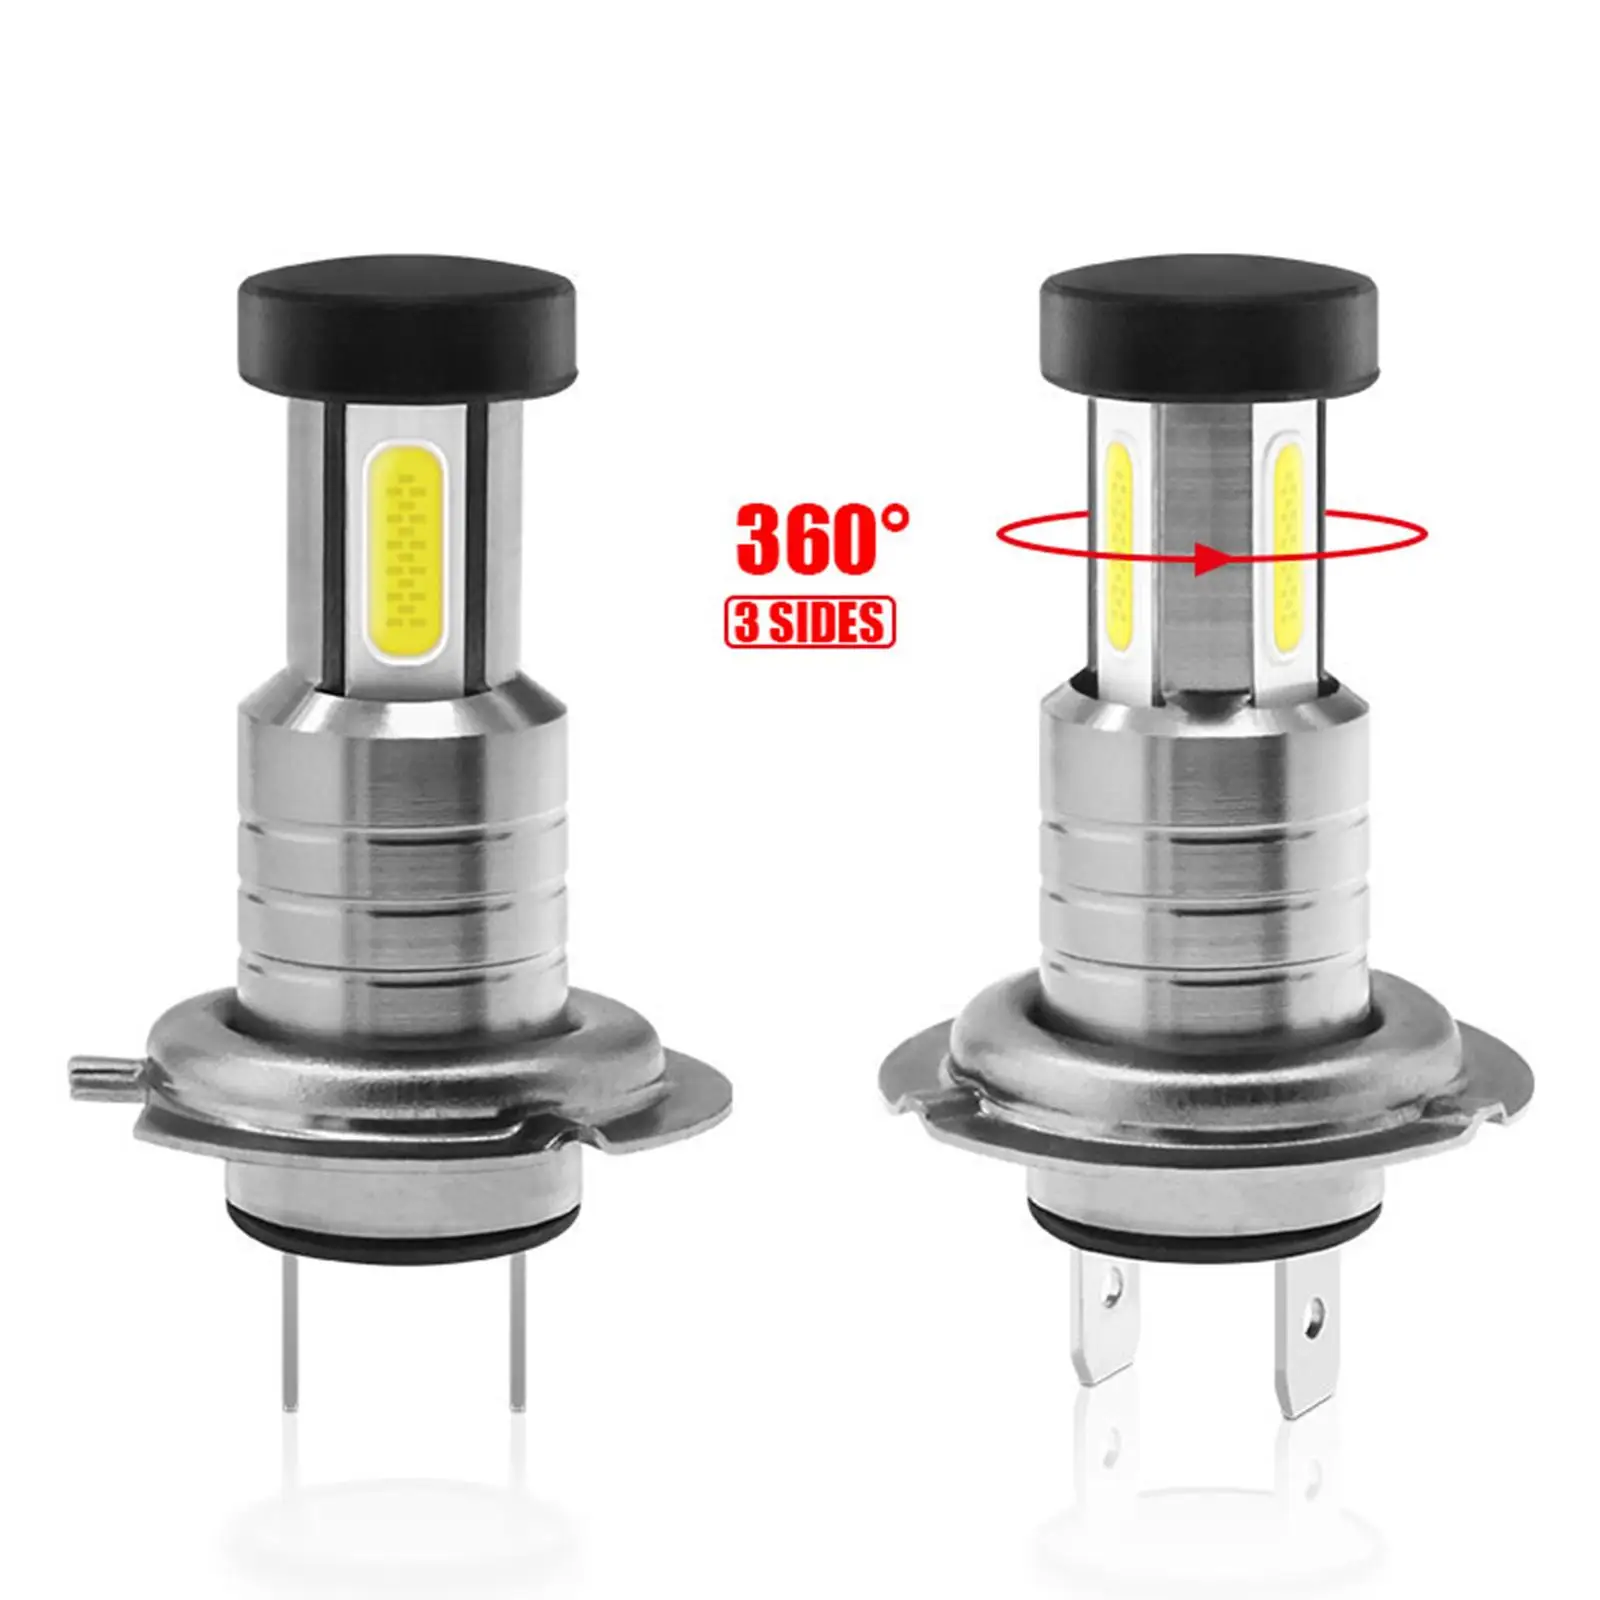 2 Pieces Bulbs-32V 13000LM 3-Side LED Chips 110W Conversions 360 Degree Lighting IP68 Waterproof